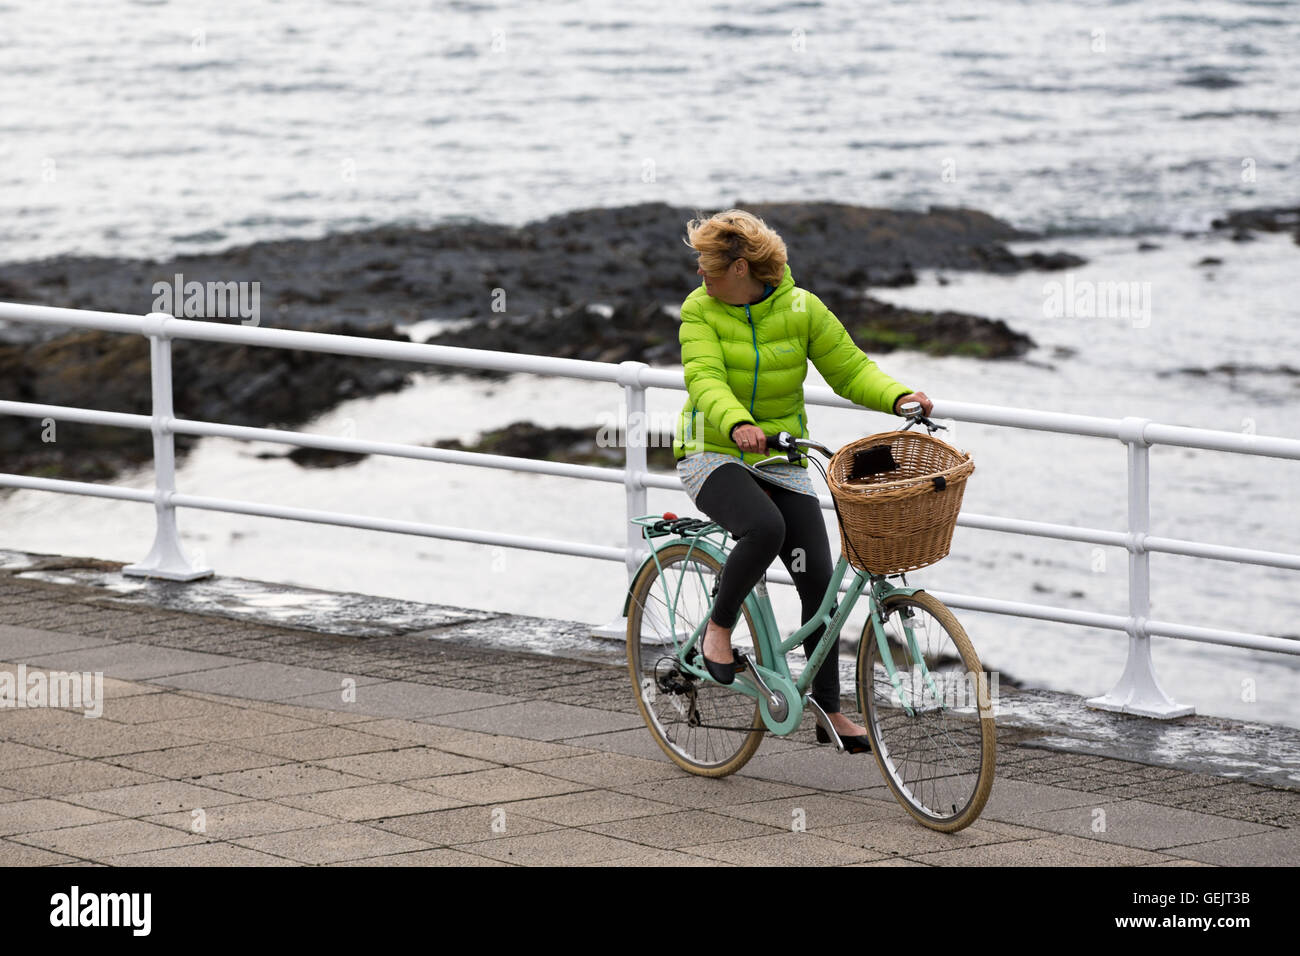 A woman looking over her shoulder as she rides a bicycle along the promenade Stock Photo